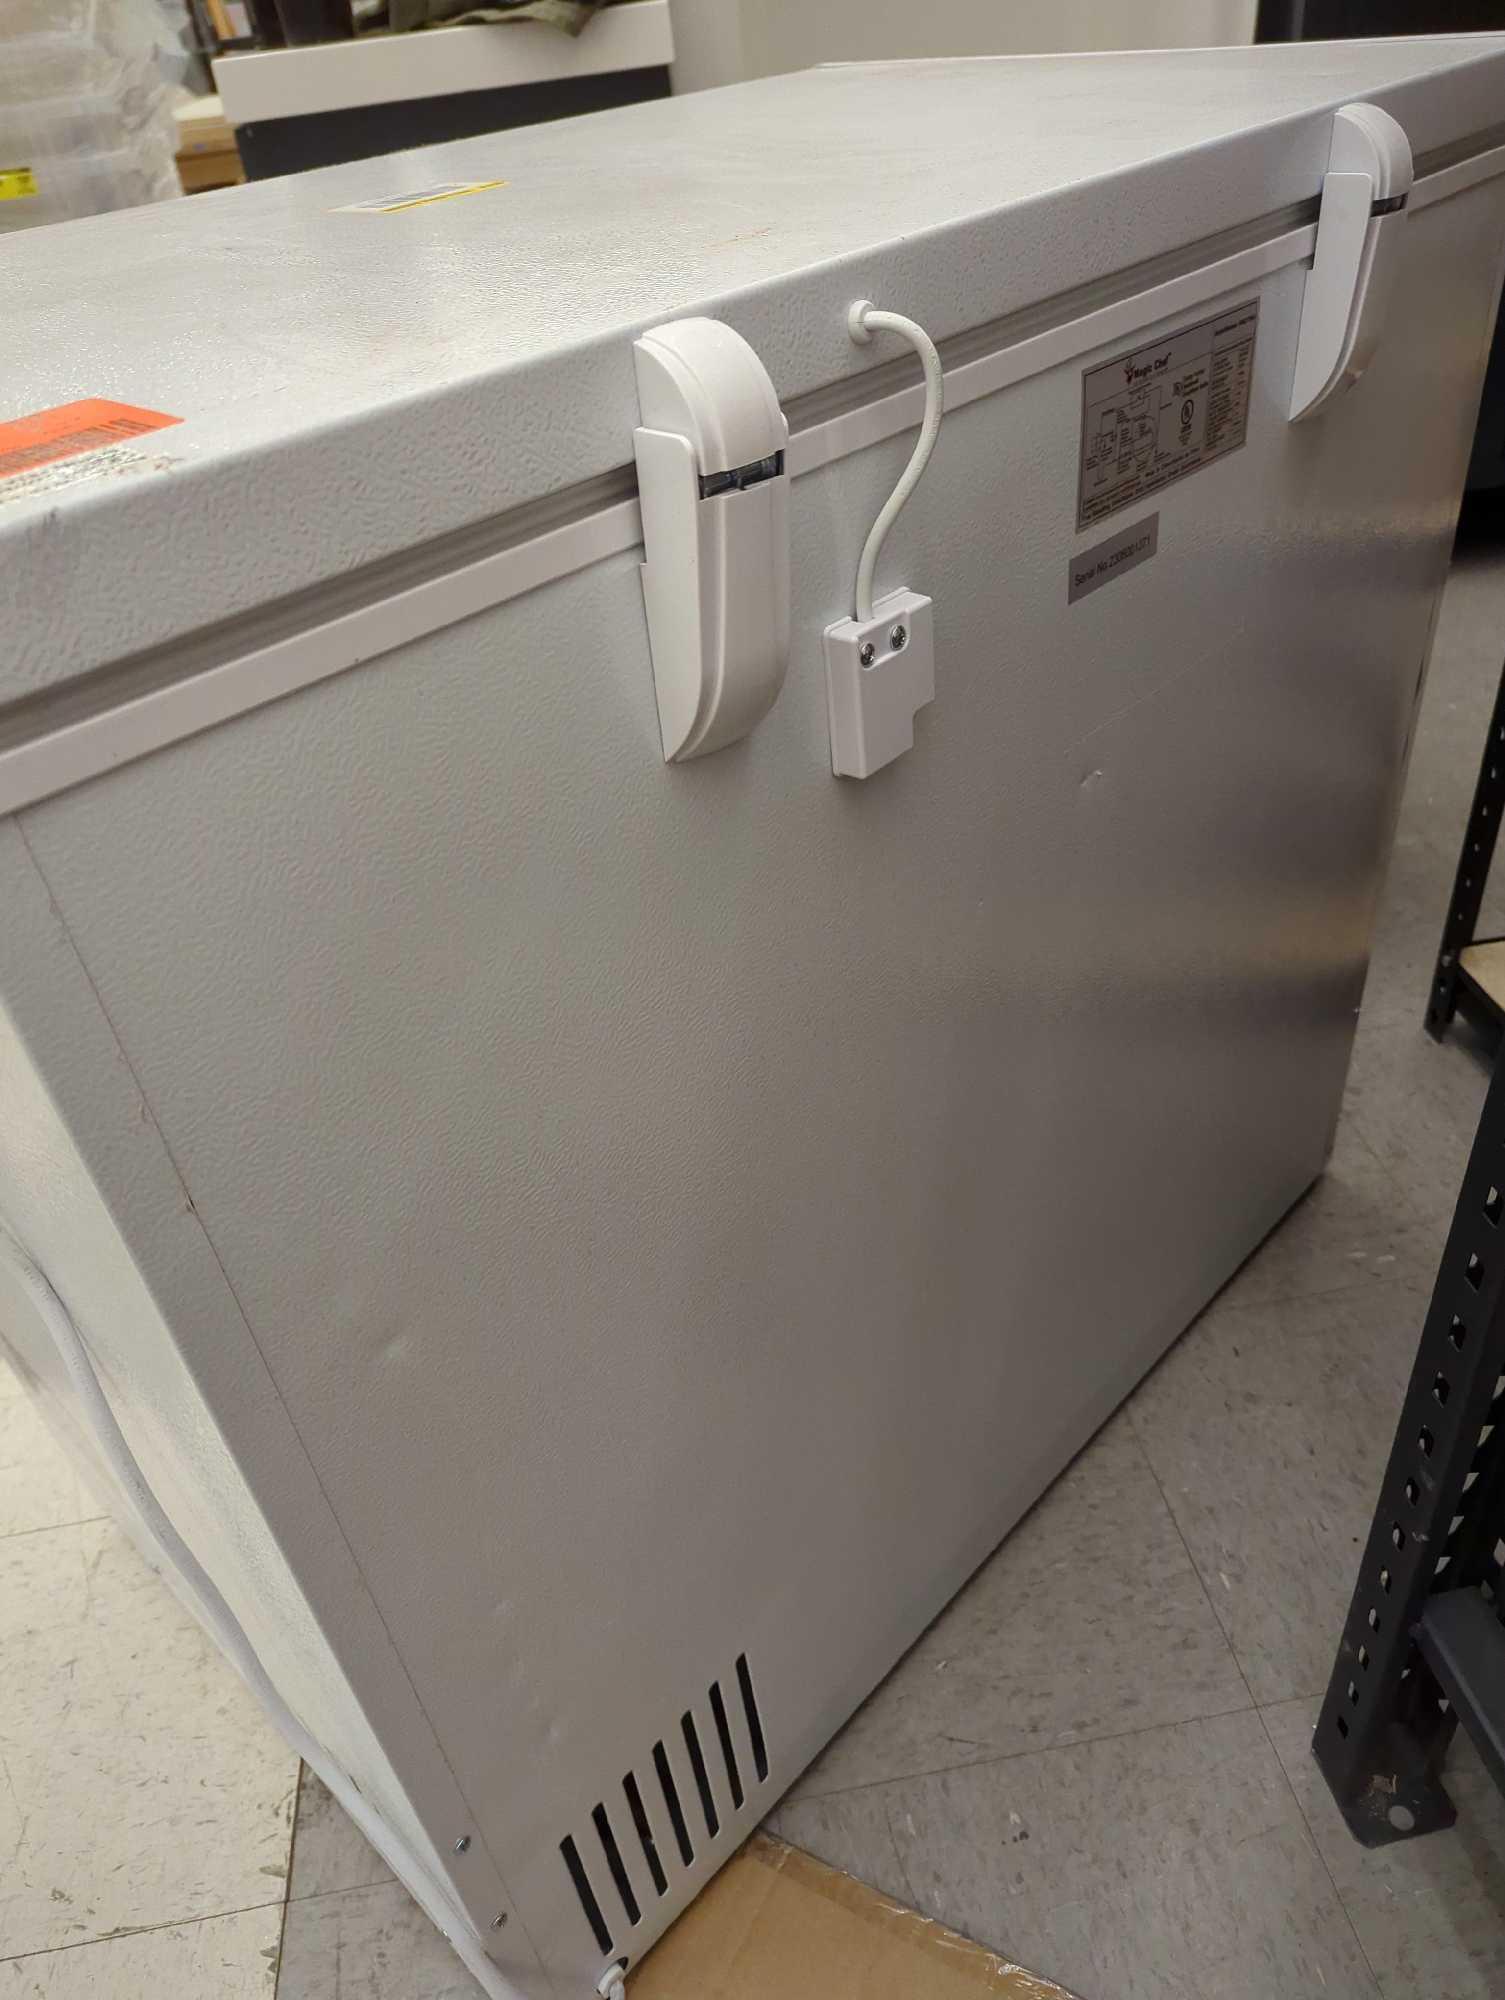 Magic Chef 7.0 cu. ft. Chest Freezer in White. Comes as is shown. Appears to be New with some